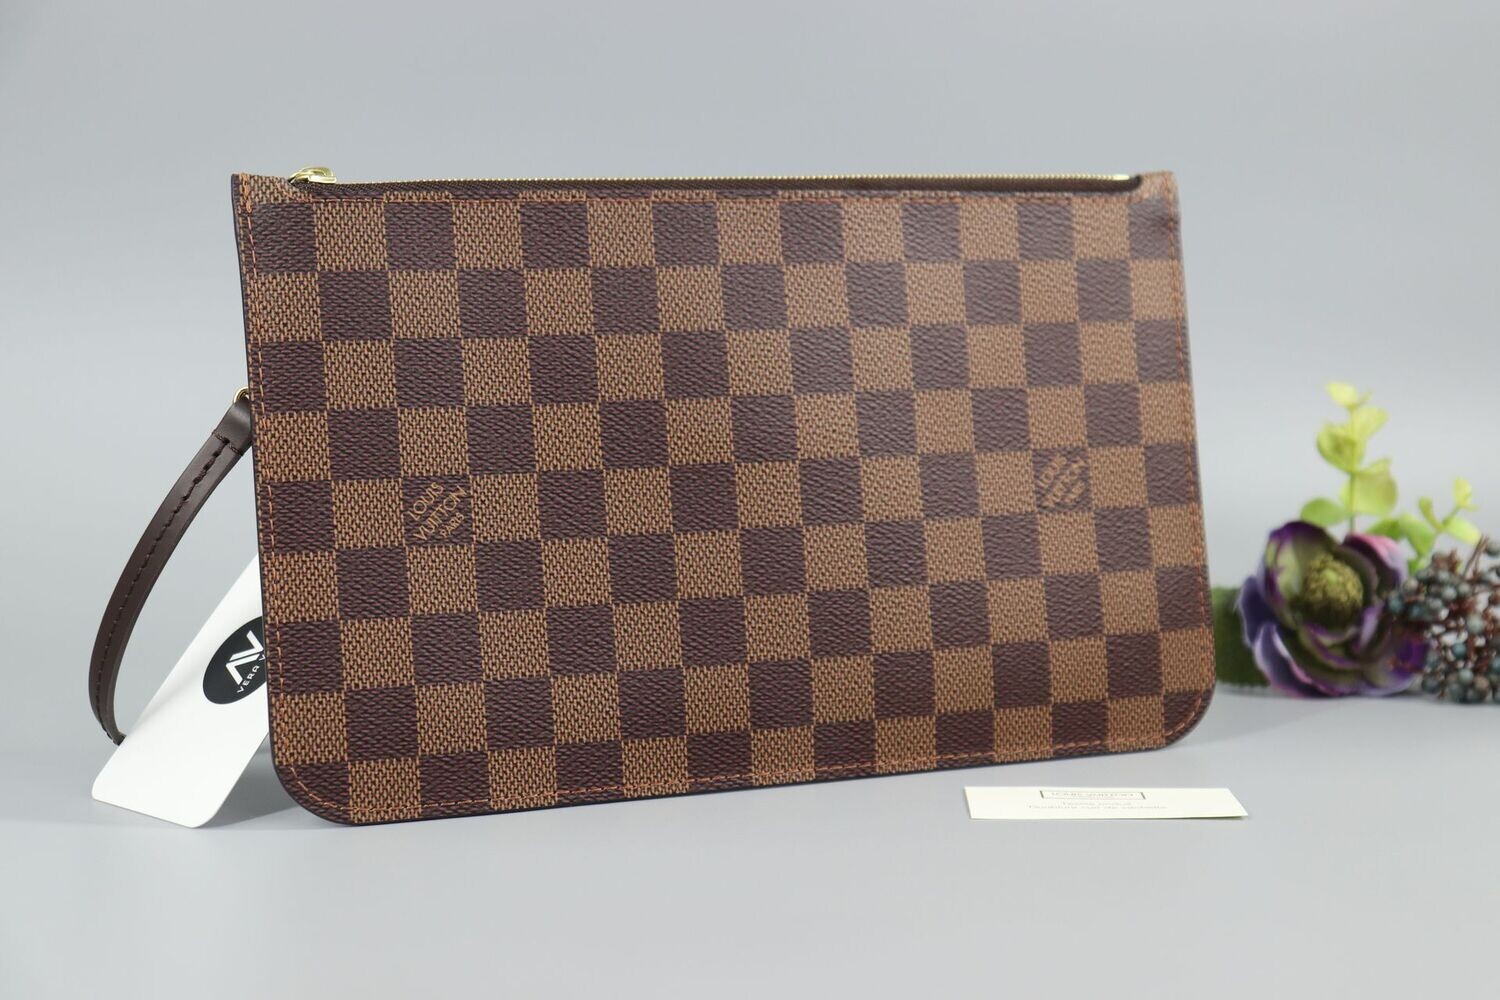 Louis Vuitton Damier Azur Neverfull MM including the removable